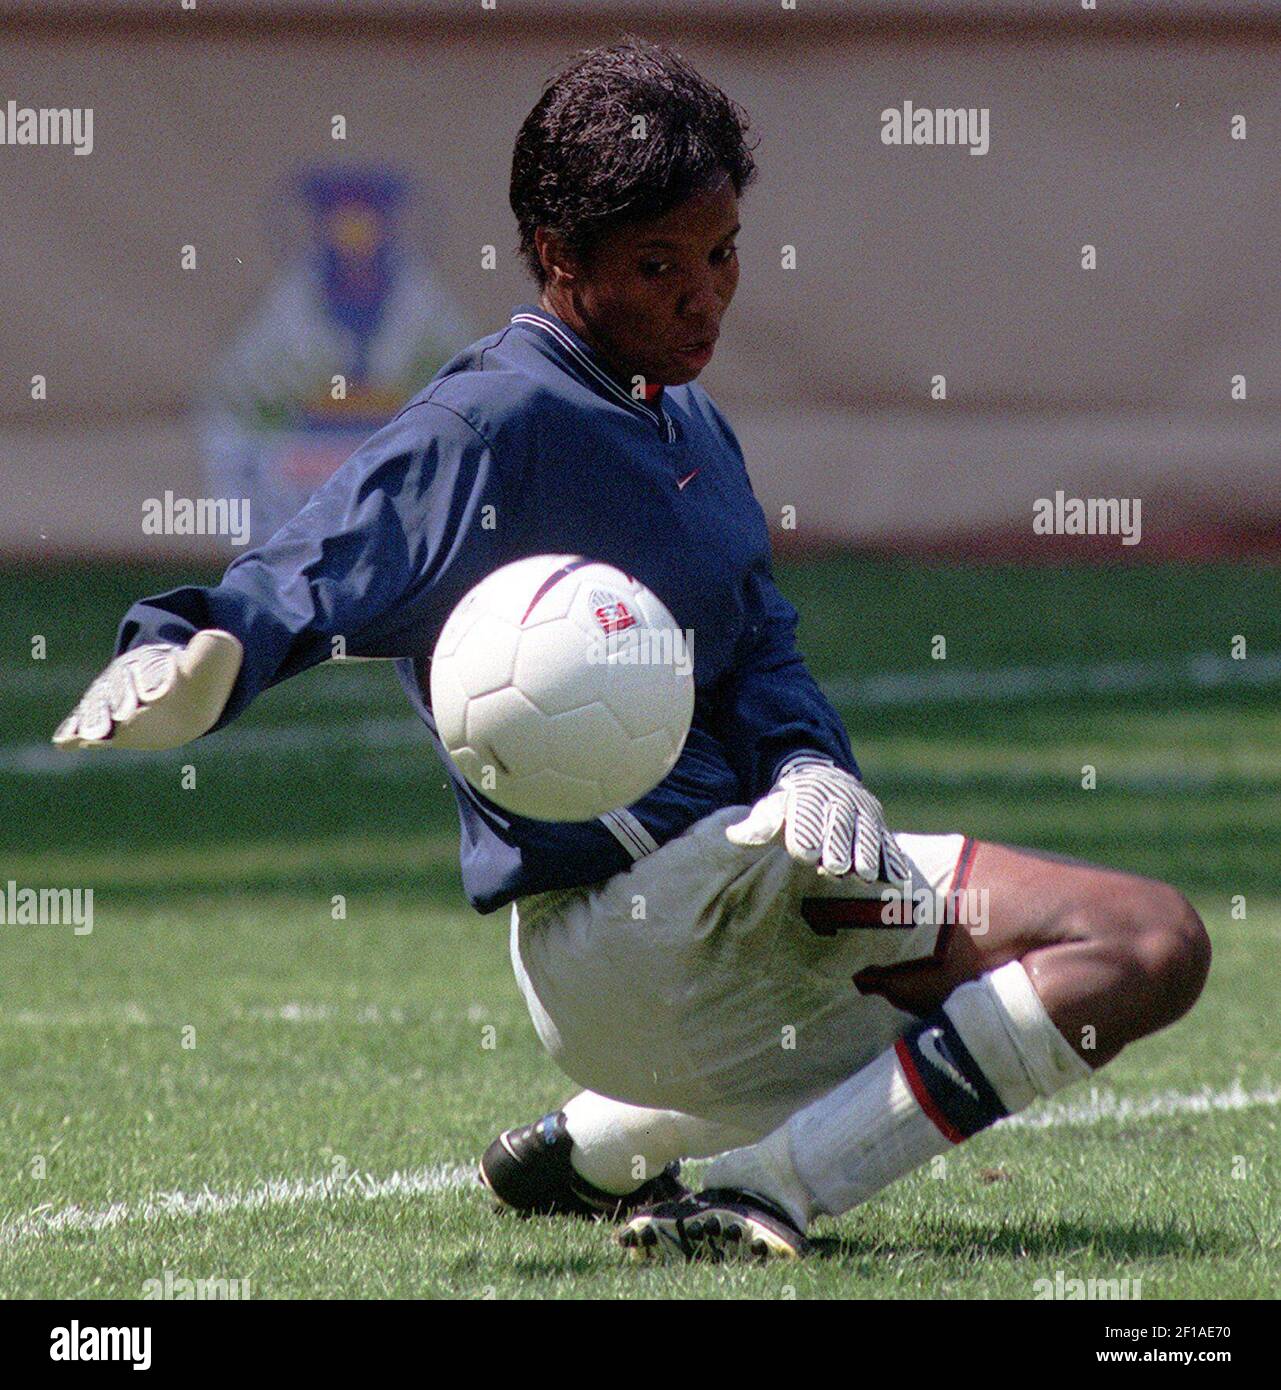 KRT SPORTS STORY SLUGGED: SCURRY-SPORTSPLUS KRT PHOTOGRAPH BY GEORGE  BRIDGES (KRT27-August 3) U.S. Women's National team goalkeeper Briana  Scurry stops a ball while warming up for a match against New Zealand in